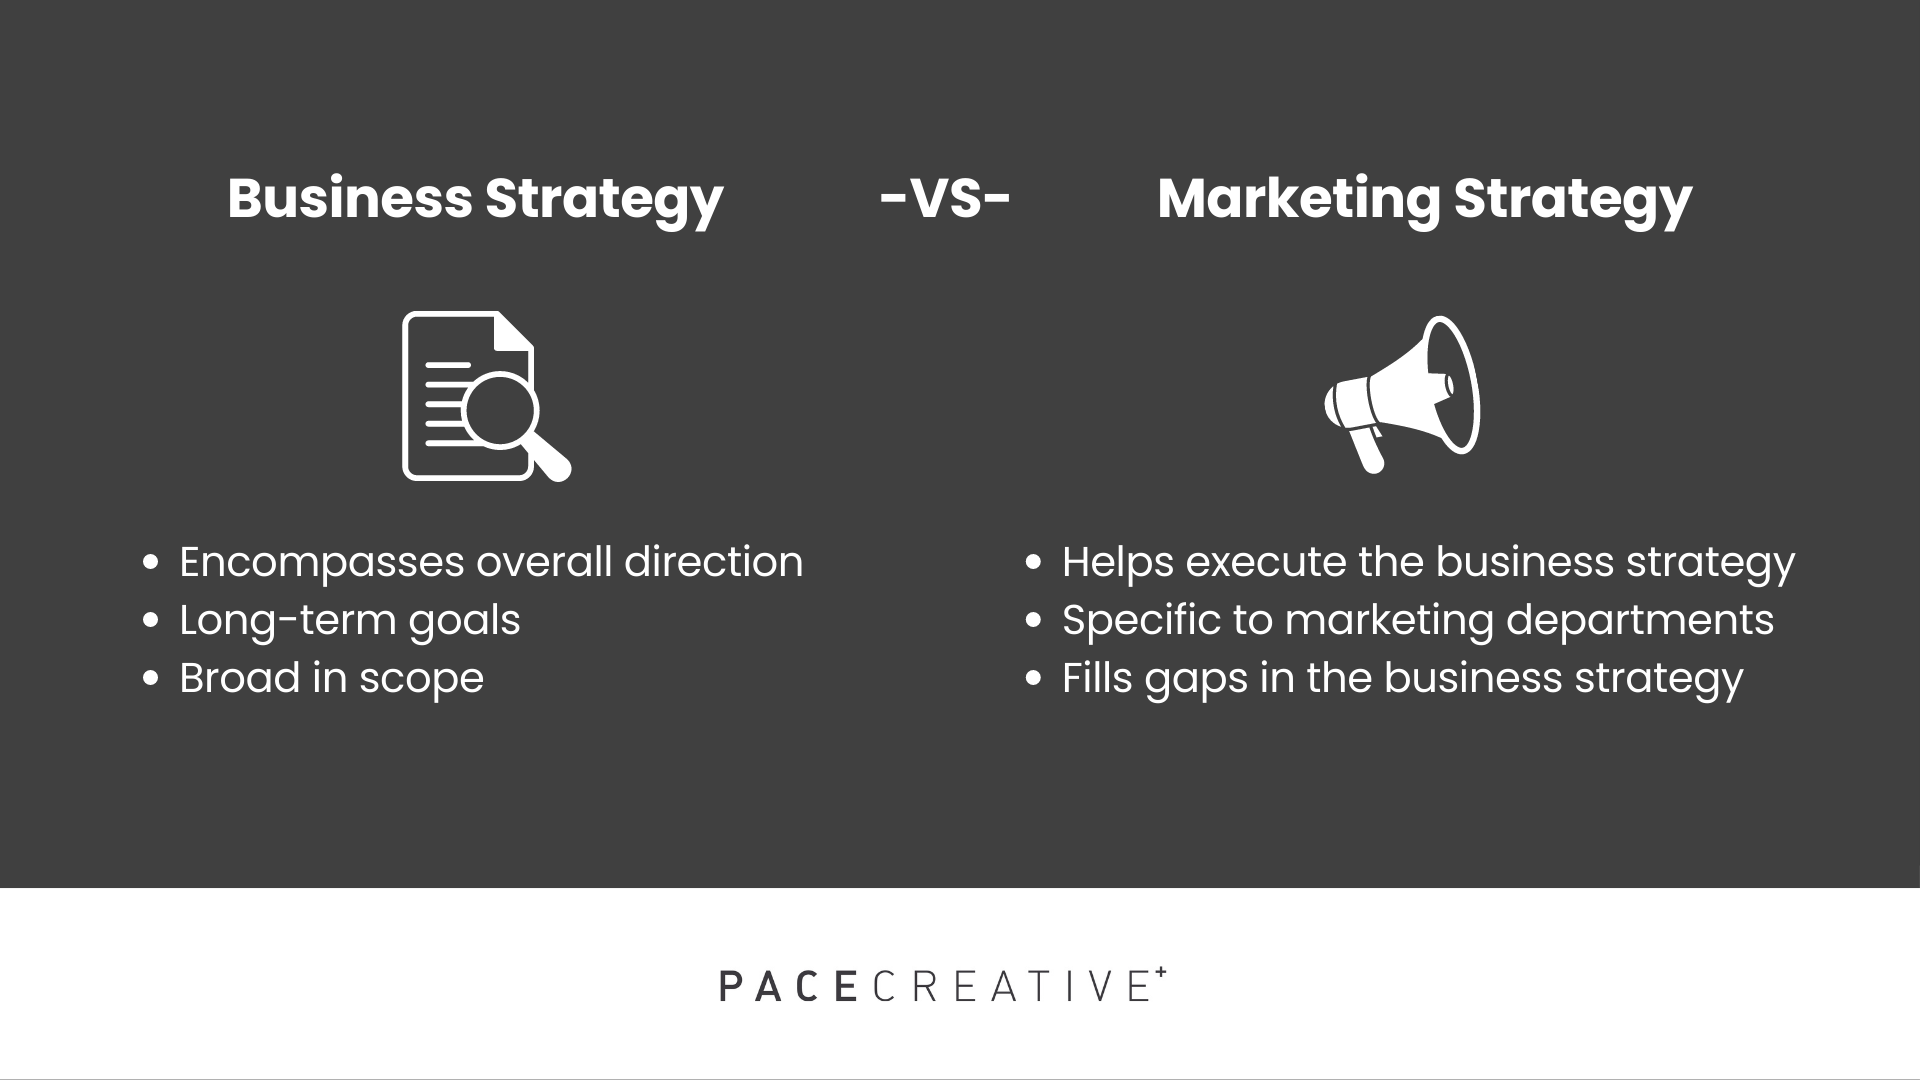 The key differences between marketing strategies and business strategies.